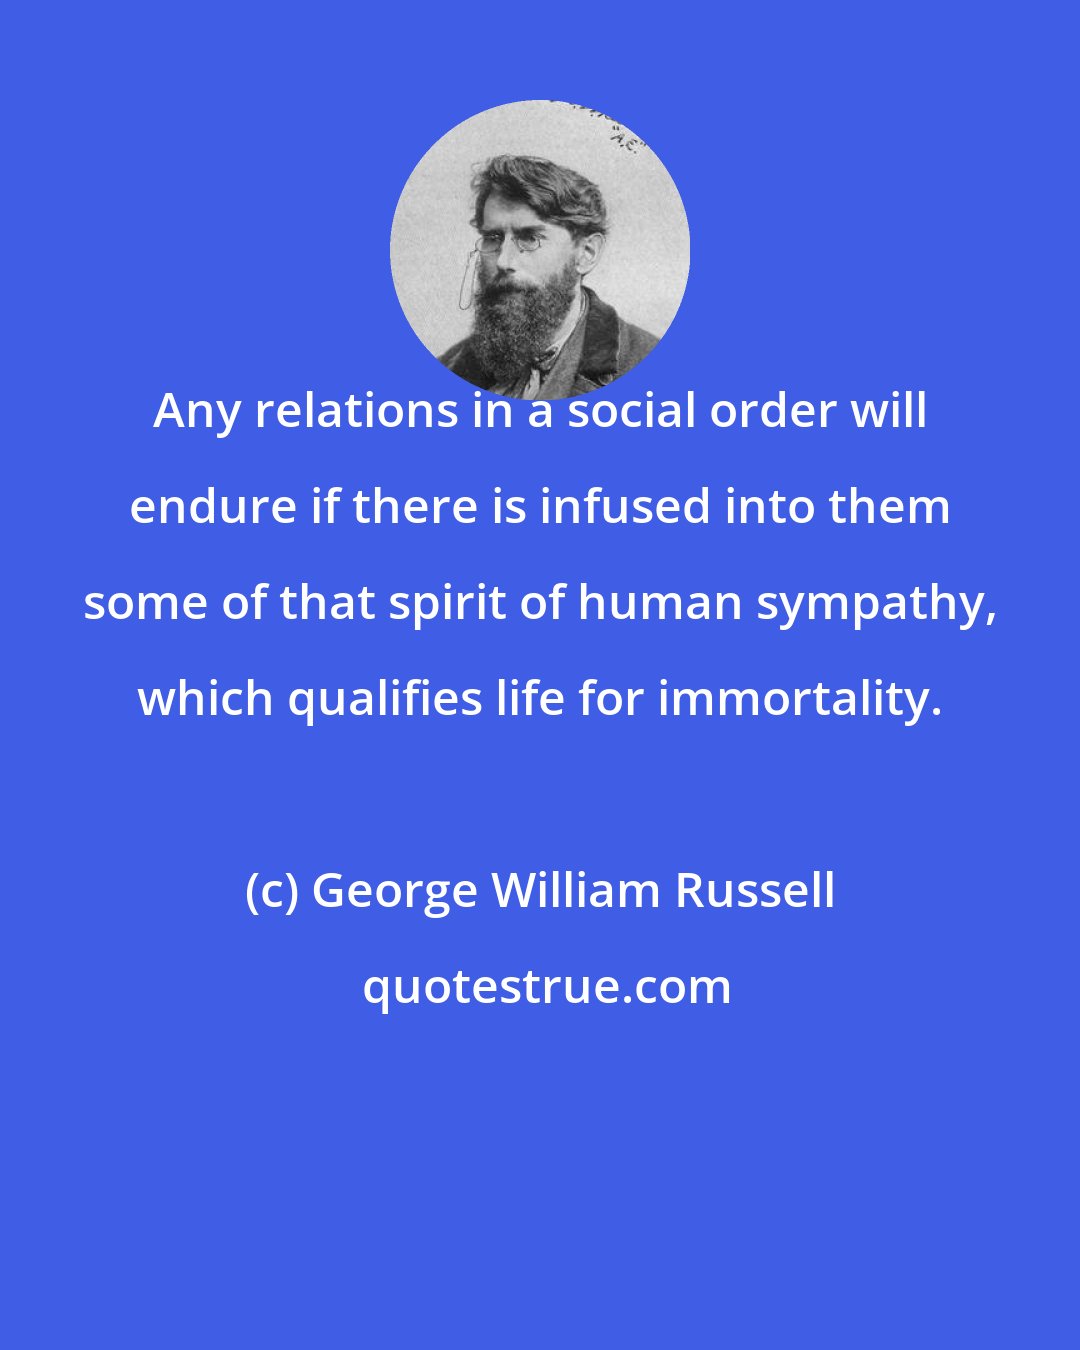 George William Russell: Any relations in a social order will endure if there is infused into them some of that spirit of human sympathy, which qualifies life for immortality.